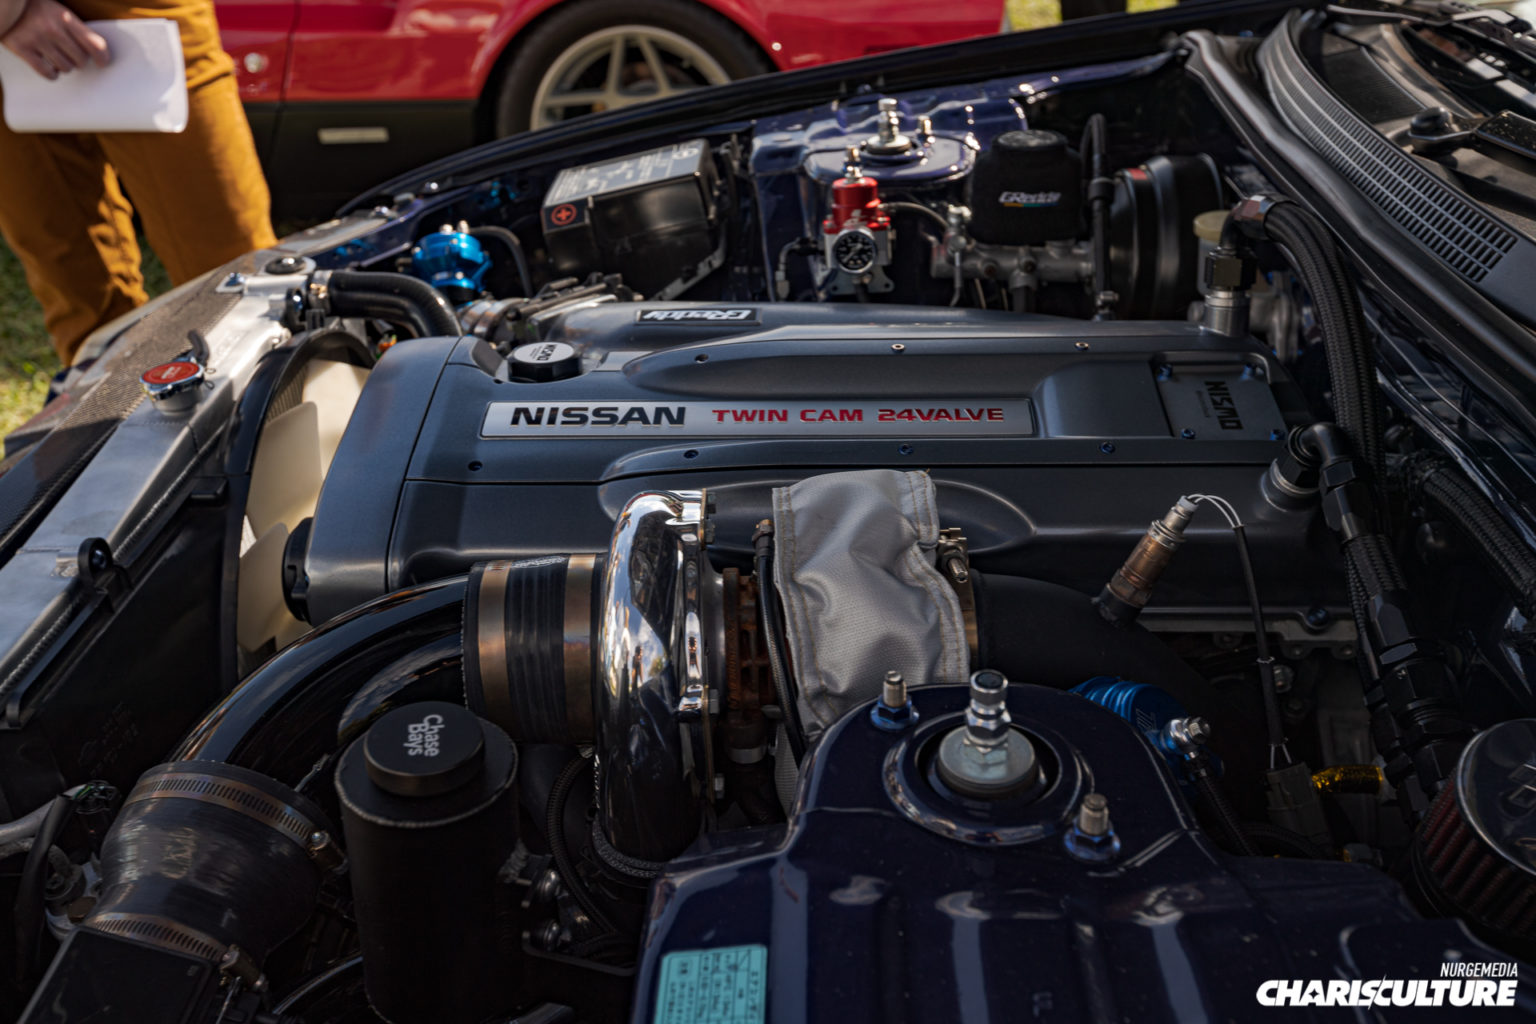 You don’t see this kind of engine at Concours events